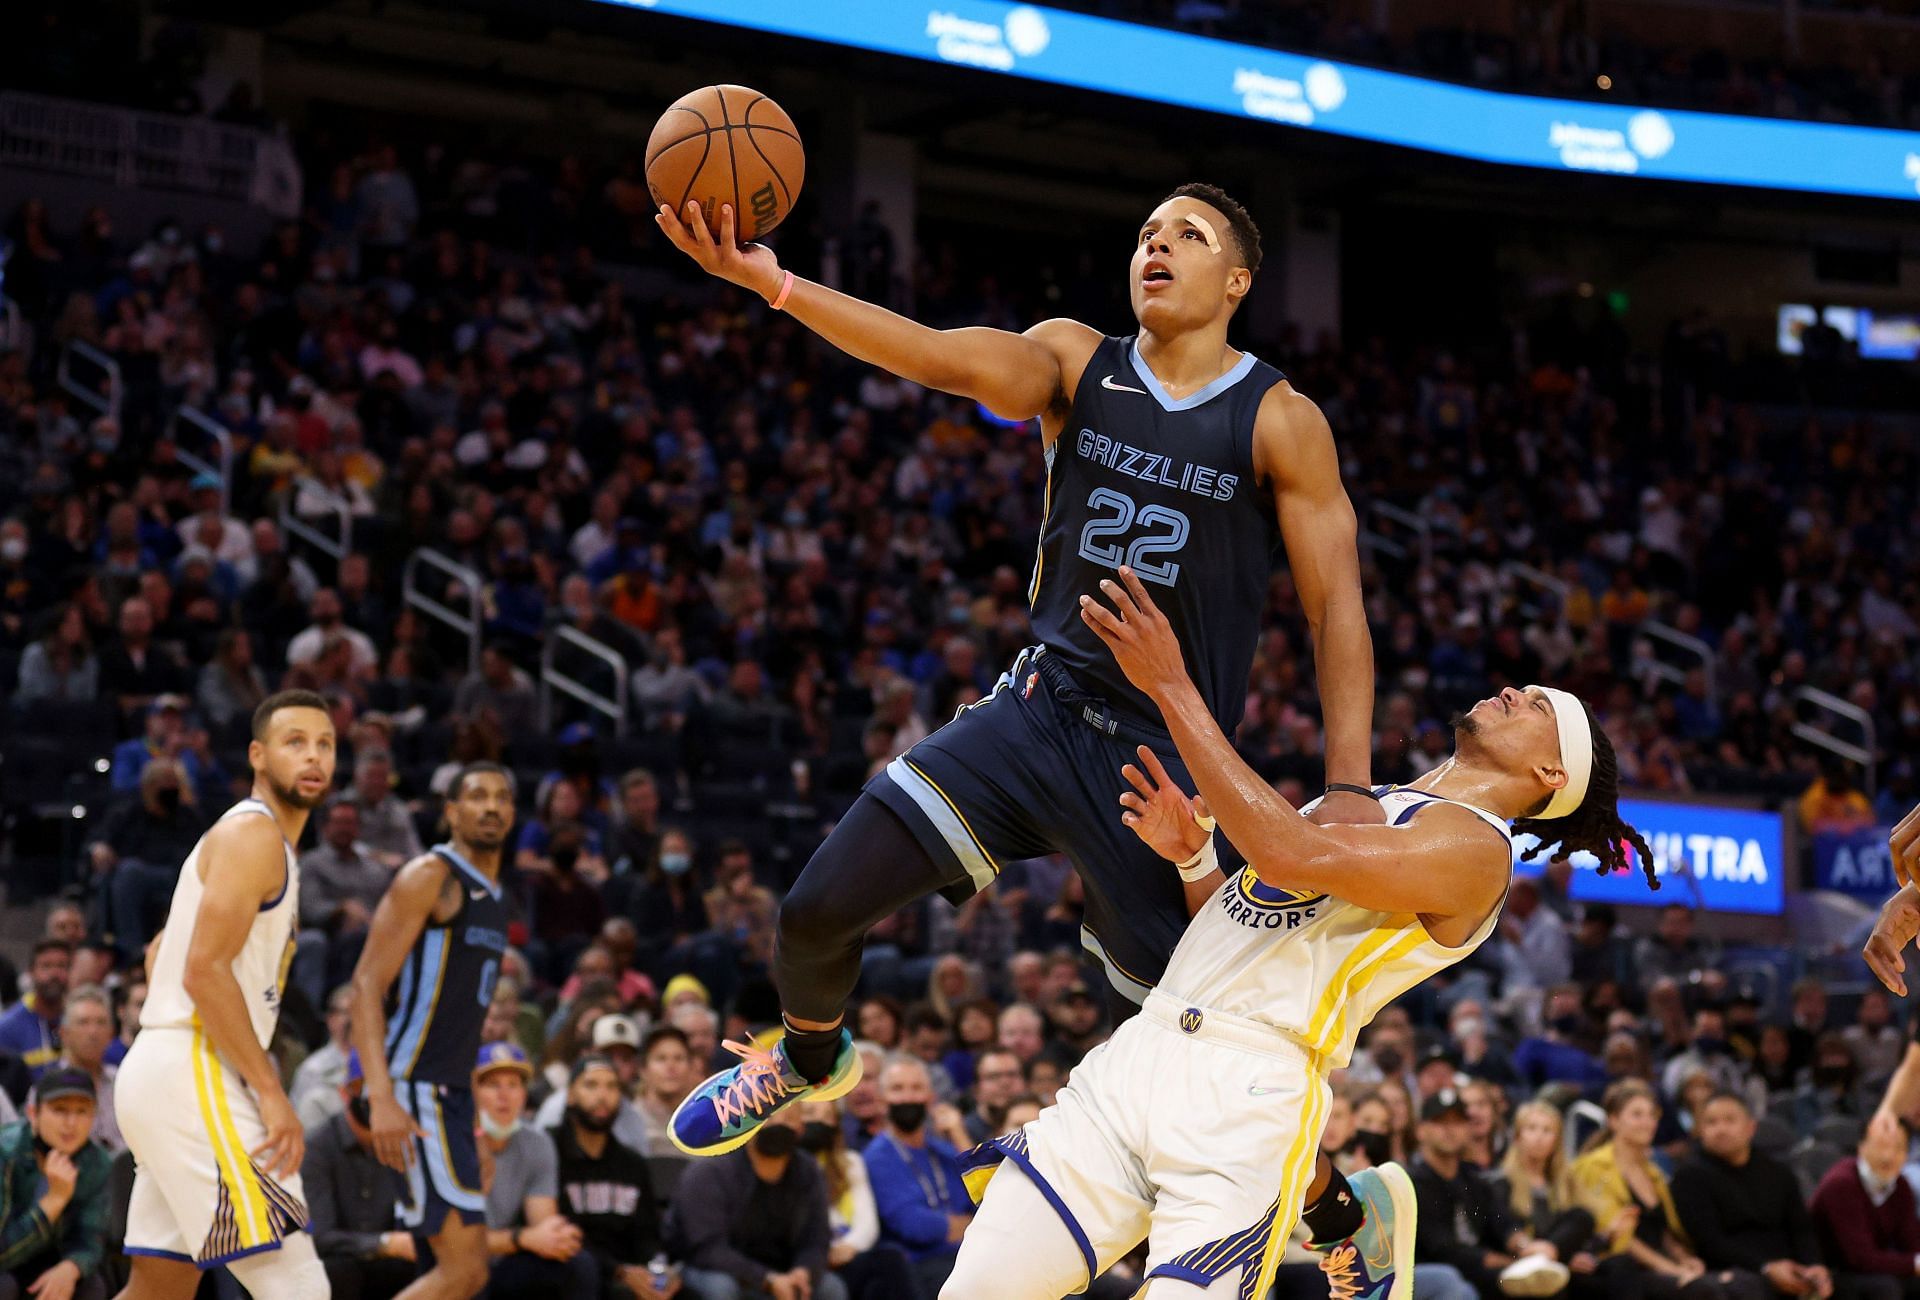 The Memphis Grizzlies pulled off an impressive 106-97 win over the Denver Nuggets on Monday.